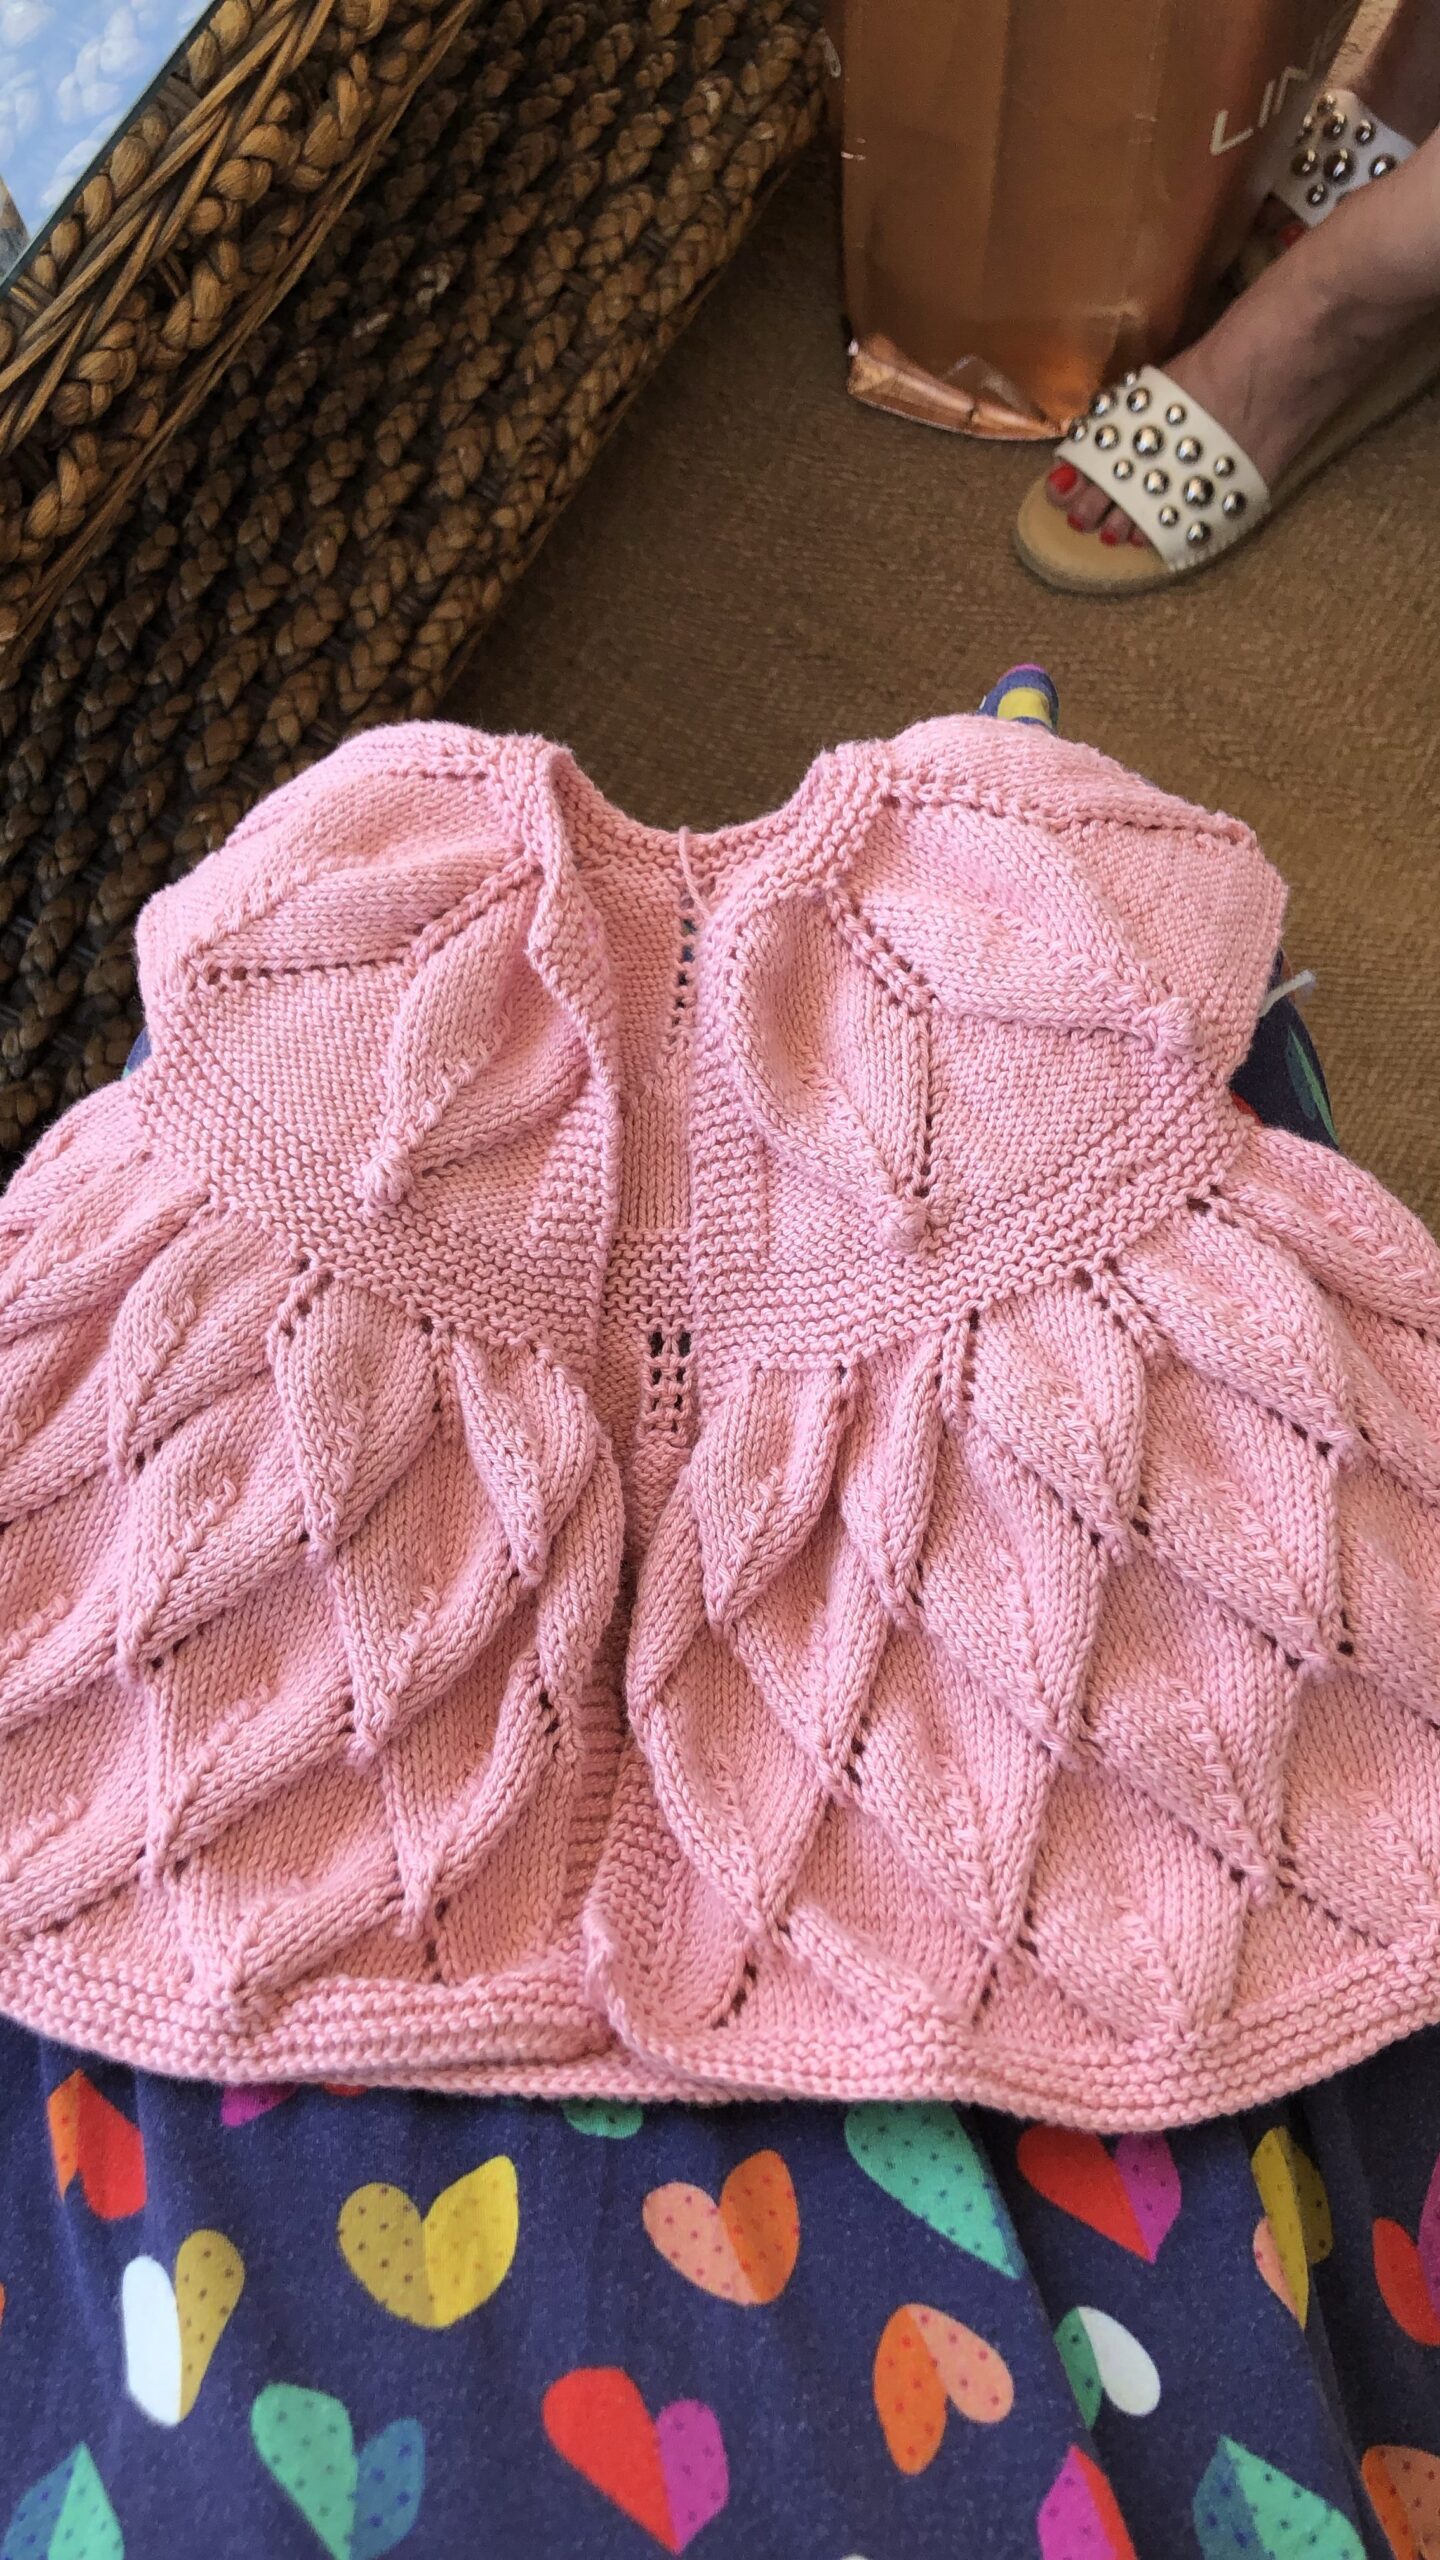 A pink knitted baby dress with complicated stitching that looks like leaves